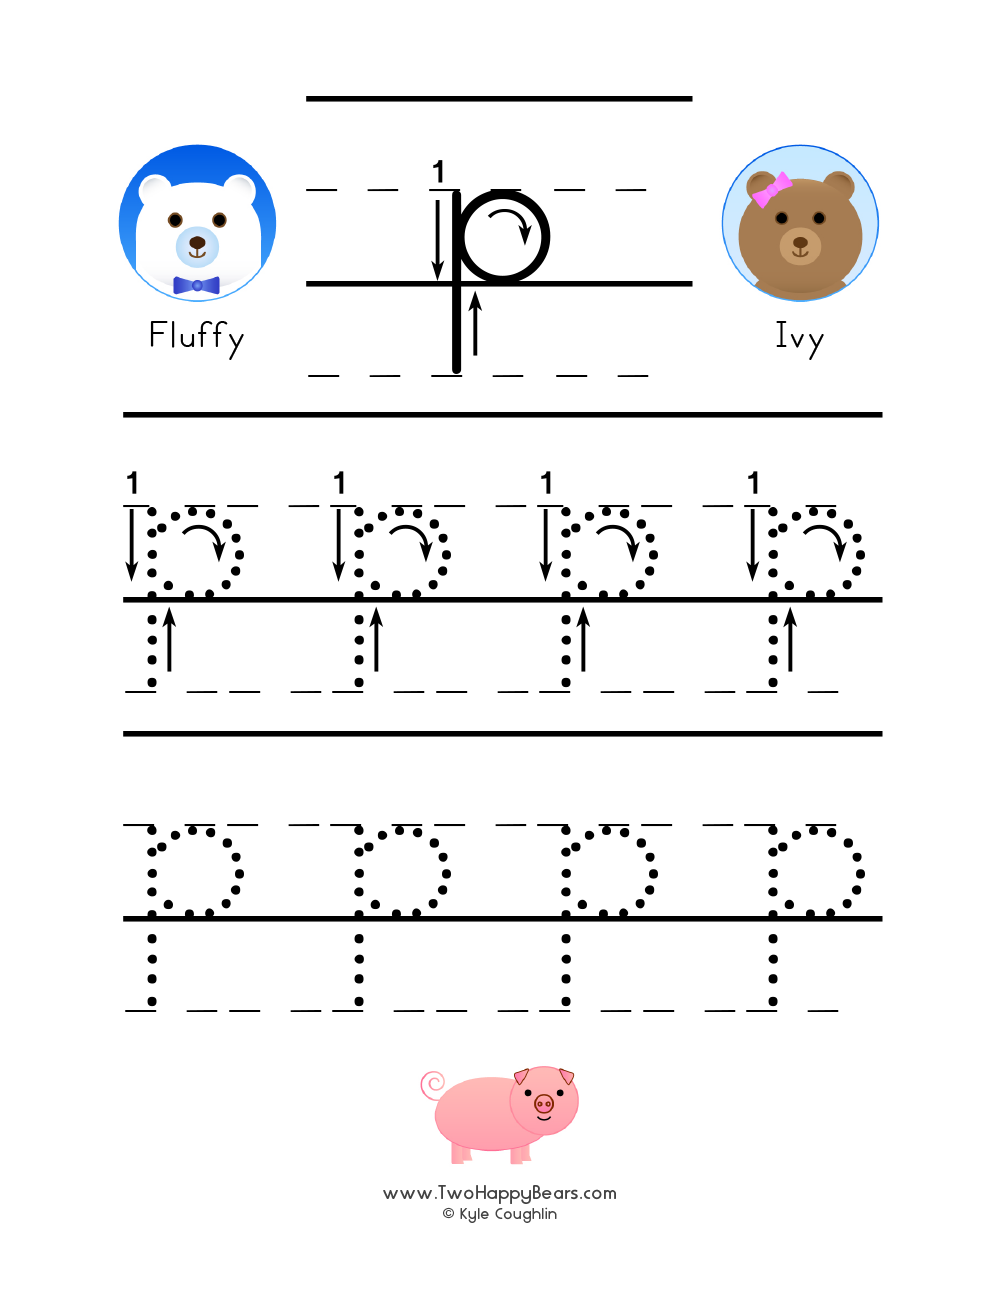 Medium size guided examples of lowercase letters to trace, with color pictures and the Two Happy Bears.